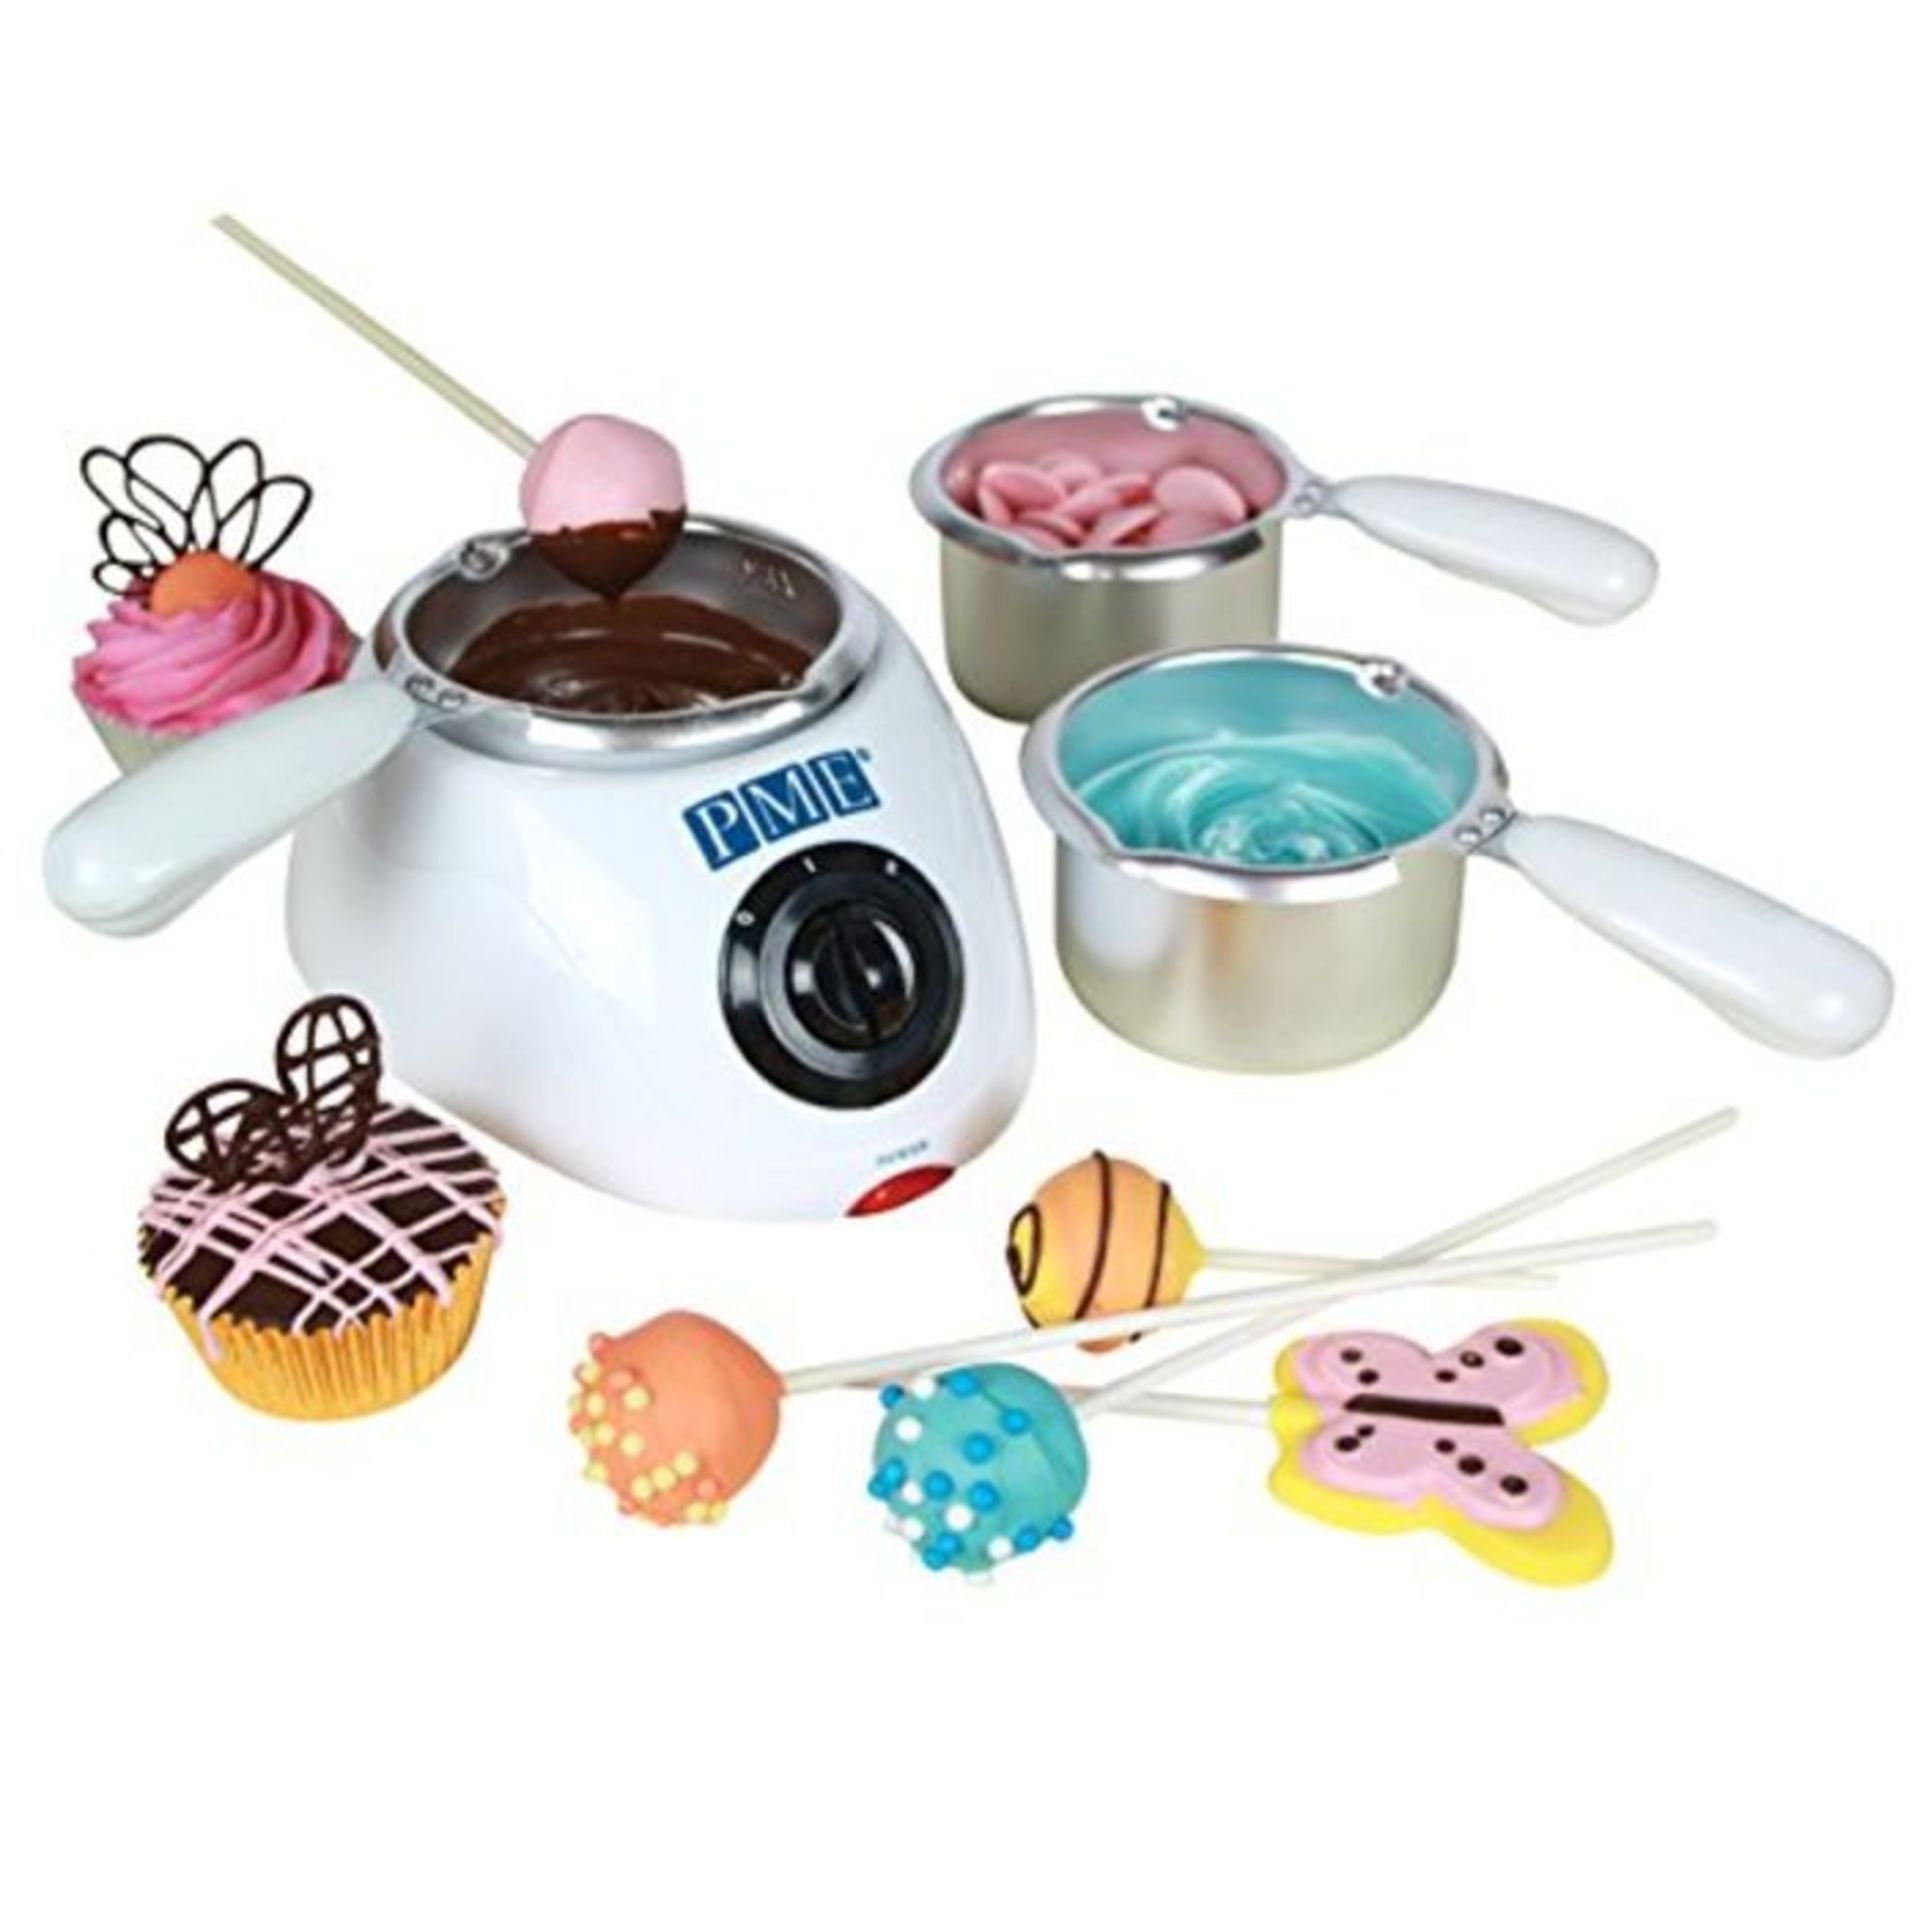 PME CM103/4/5 Electric Chocolate Melting Pot with 3 Pots Included, White